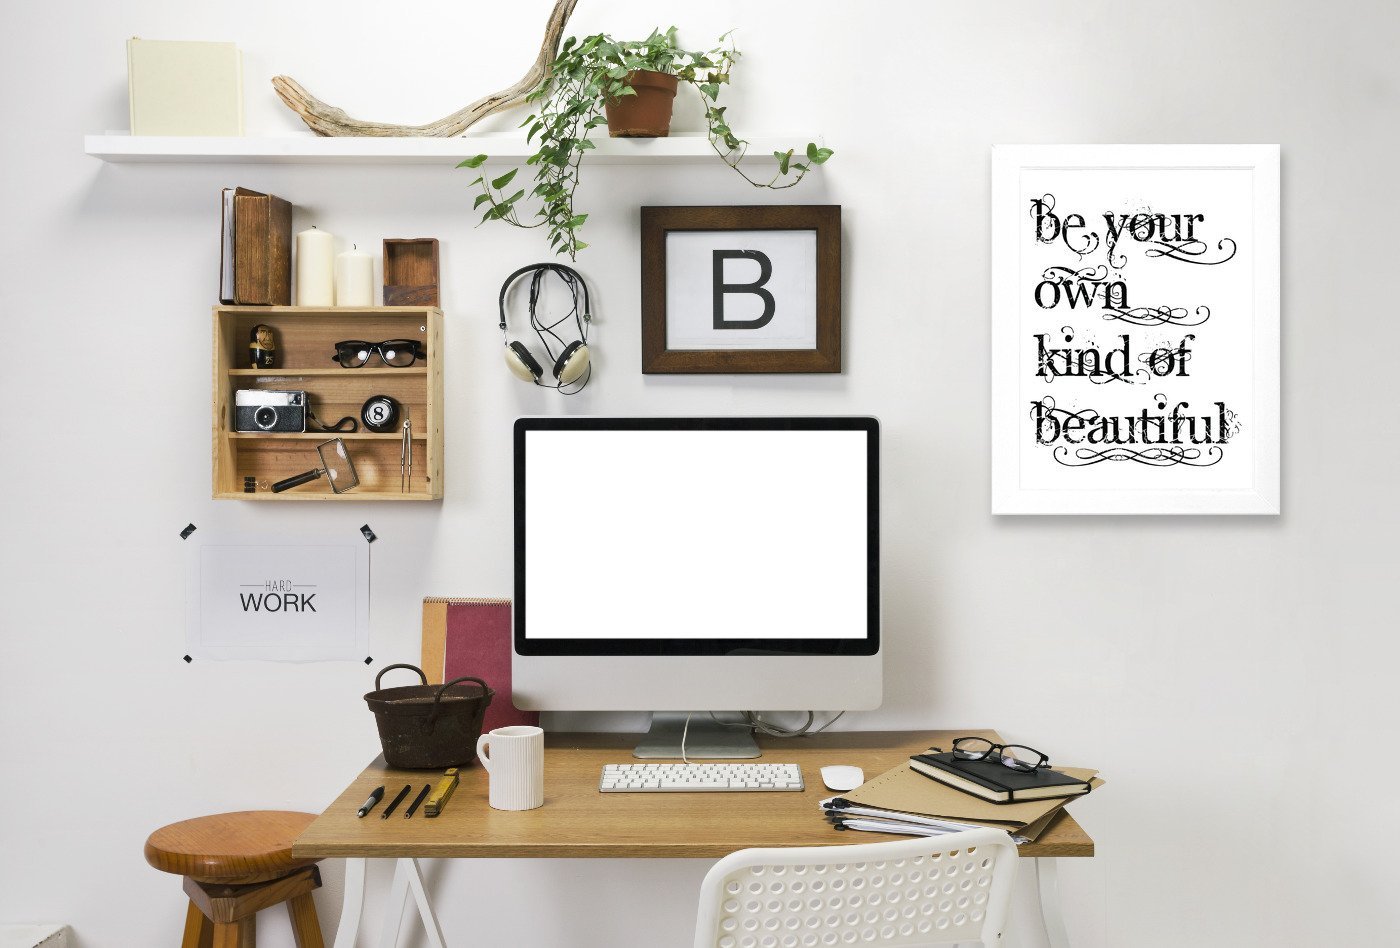 Be Own Beautiful by Amy Brinkman Framed Print - Americanflat